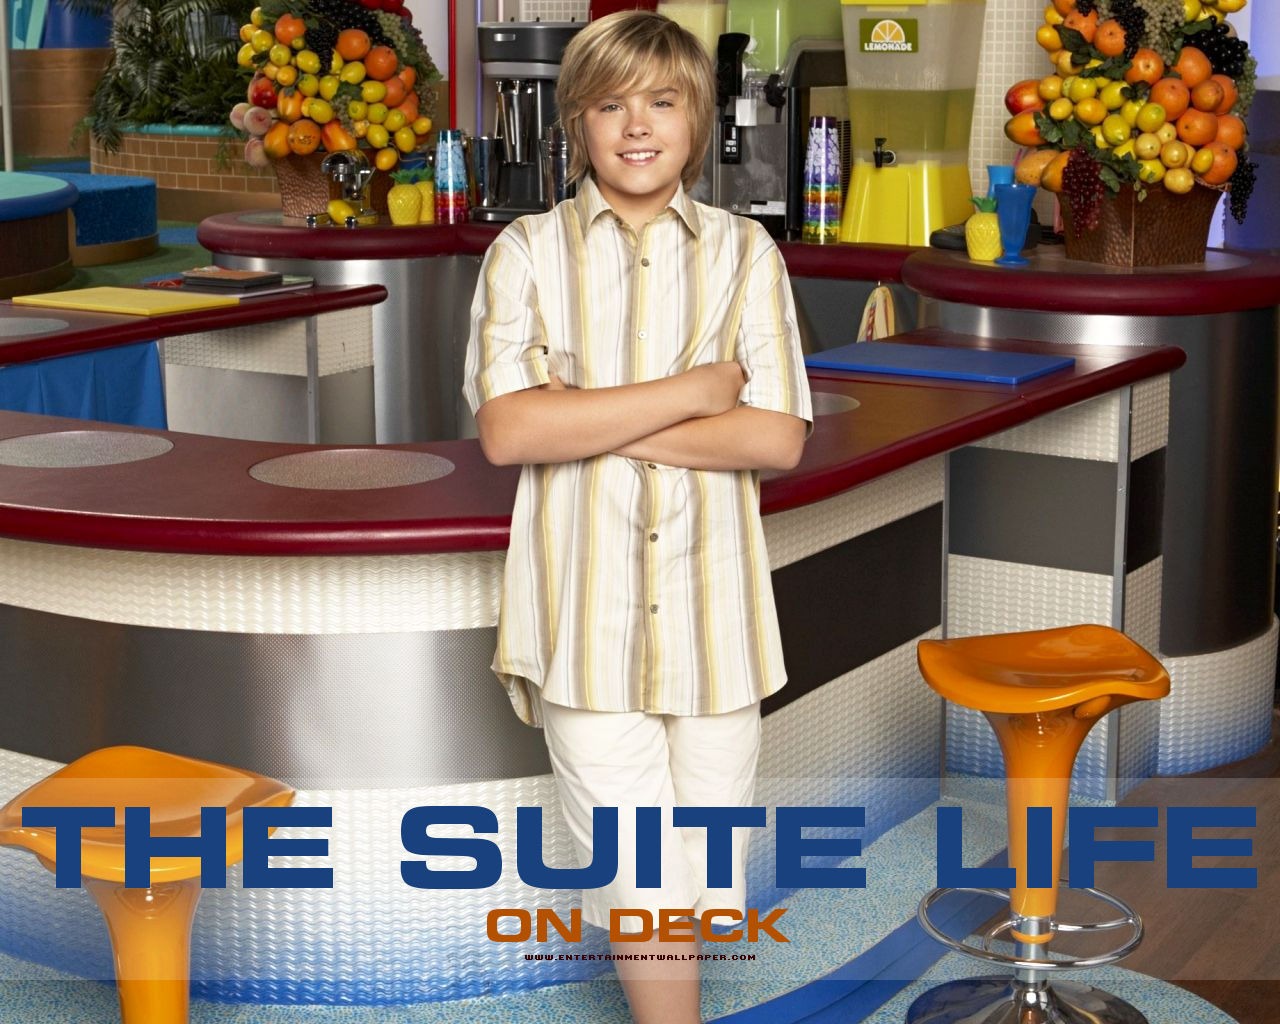 The Suite Life on Deck 甲板上的套房生活 #7 - 1280x1024